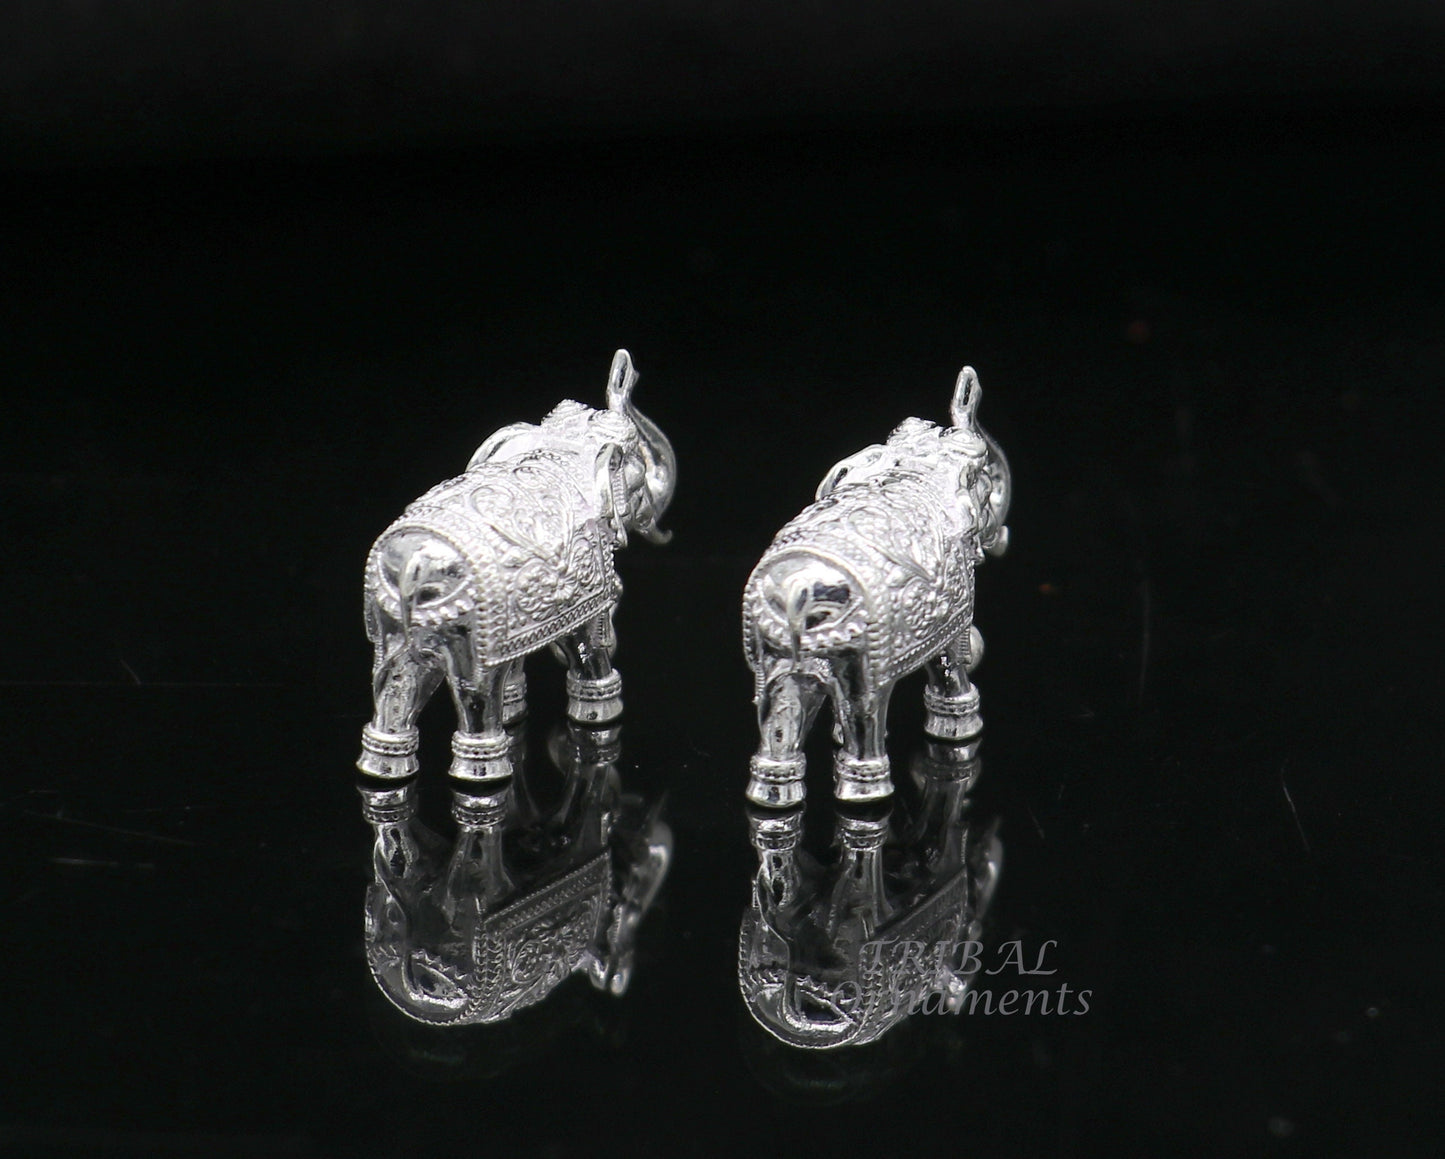 Divine 925 Sterling silver Divine Elephant statues, puja articles figurines, best silver article for your homes wealth and prosperity art570 - TRIBAL ORNAMENTS